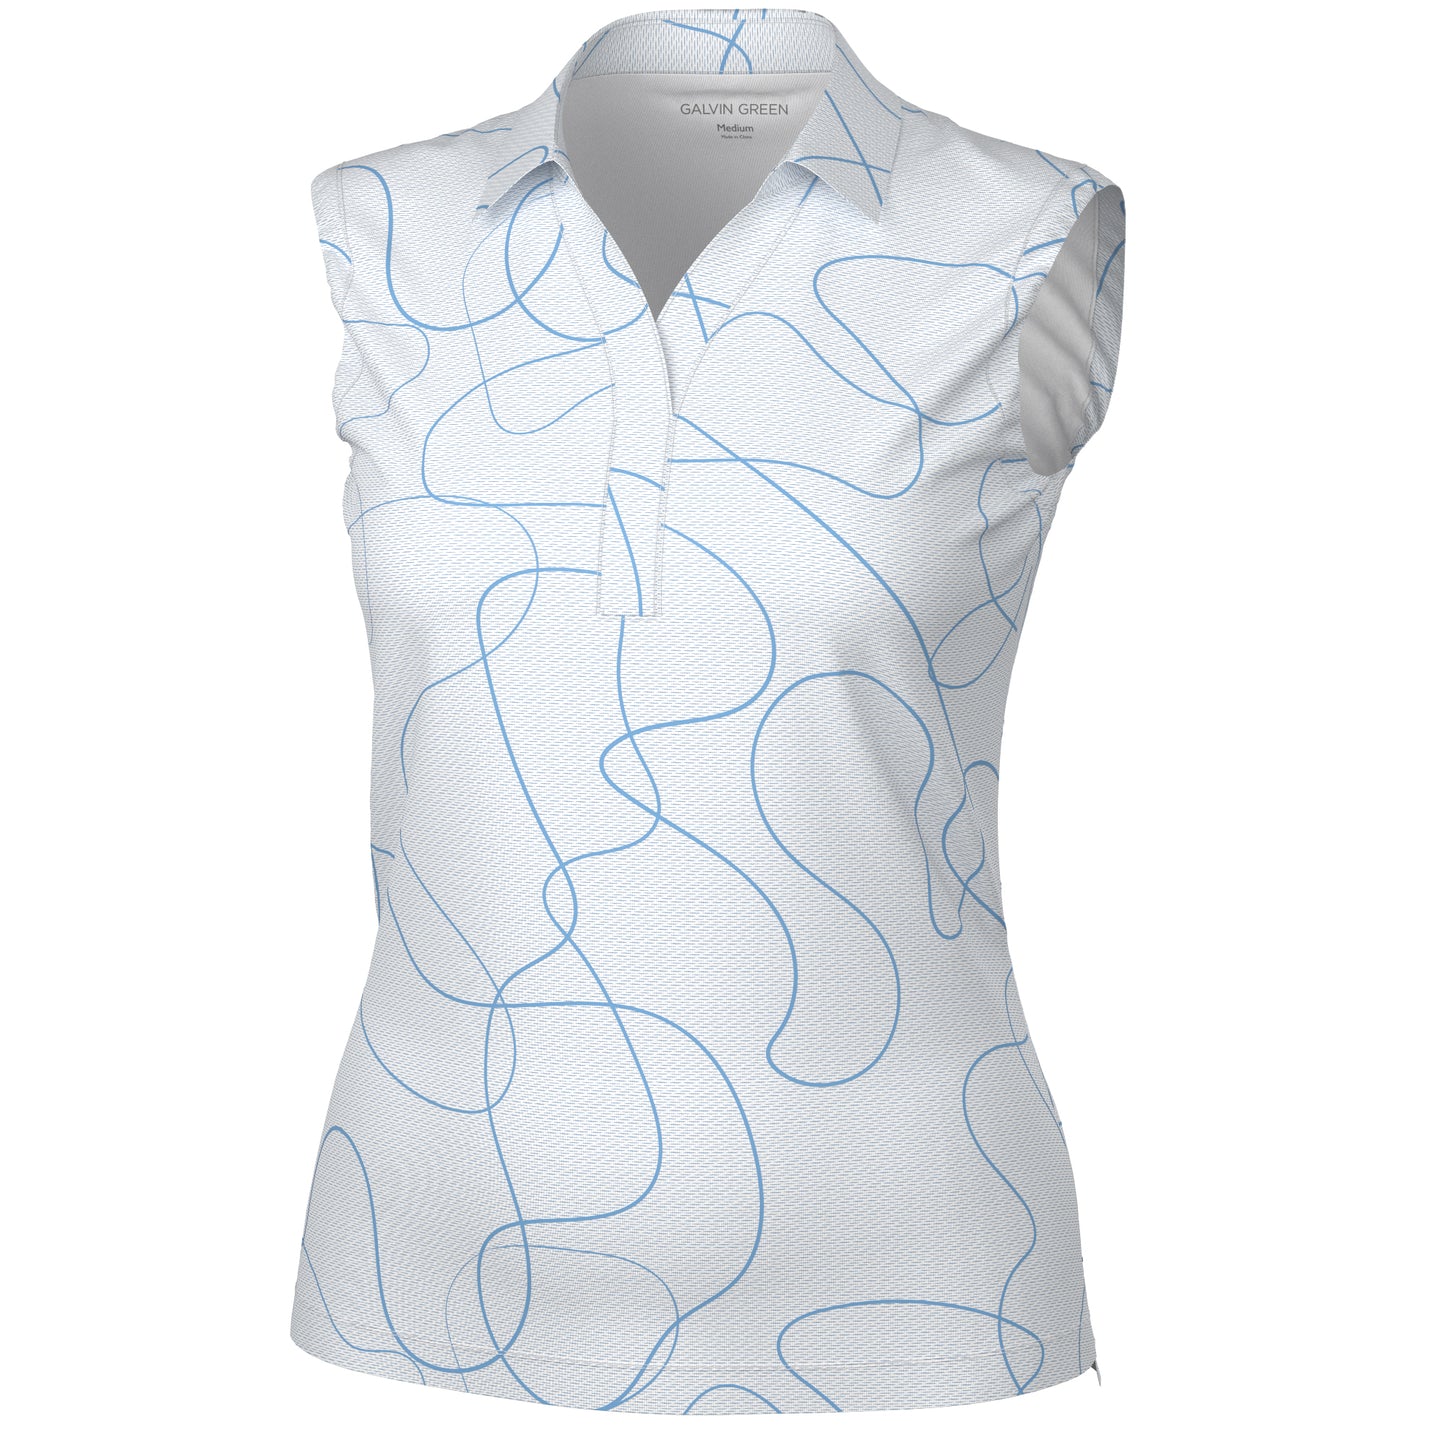 Galvin Green Ladies VENTIL8 PLUS Sleeveless Polo with Swirling Ribbon in Alaskan Blue